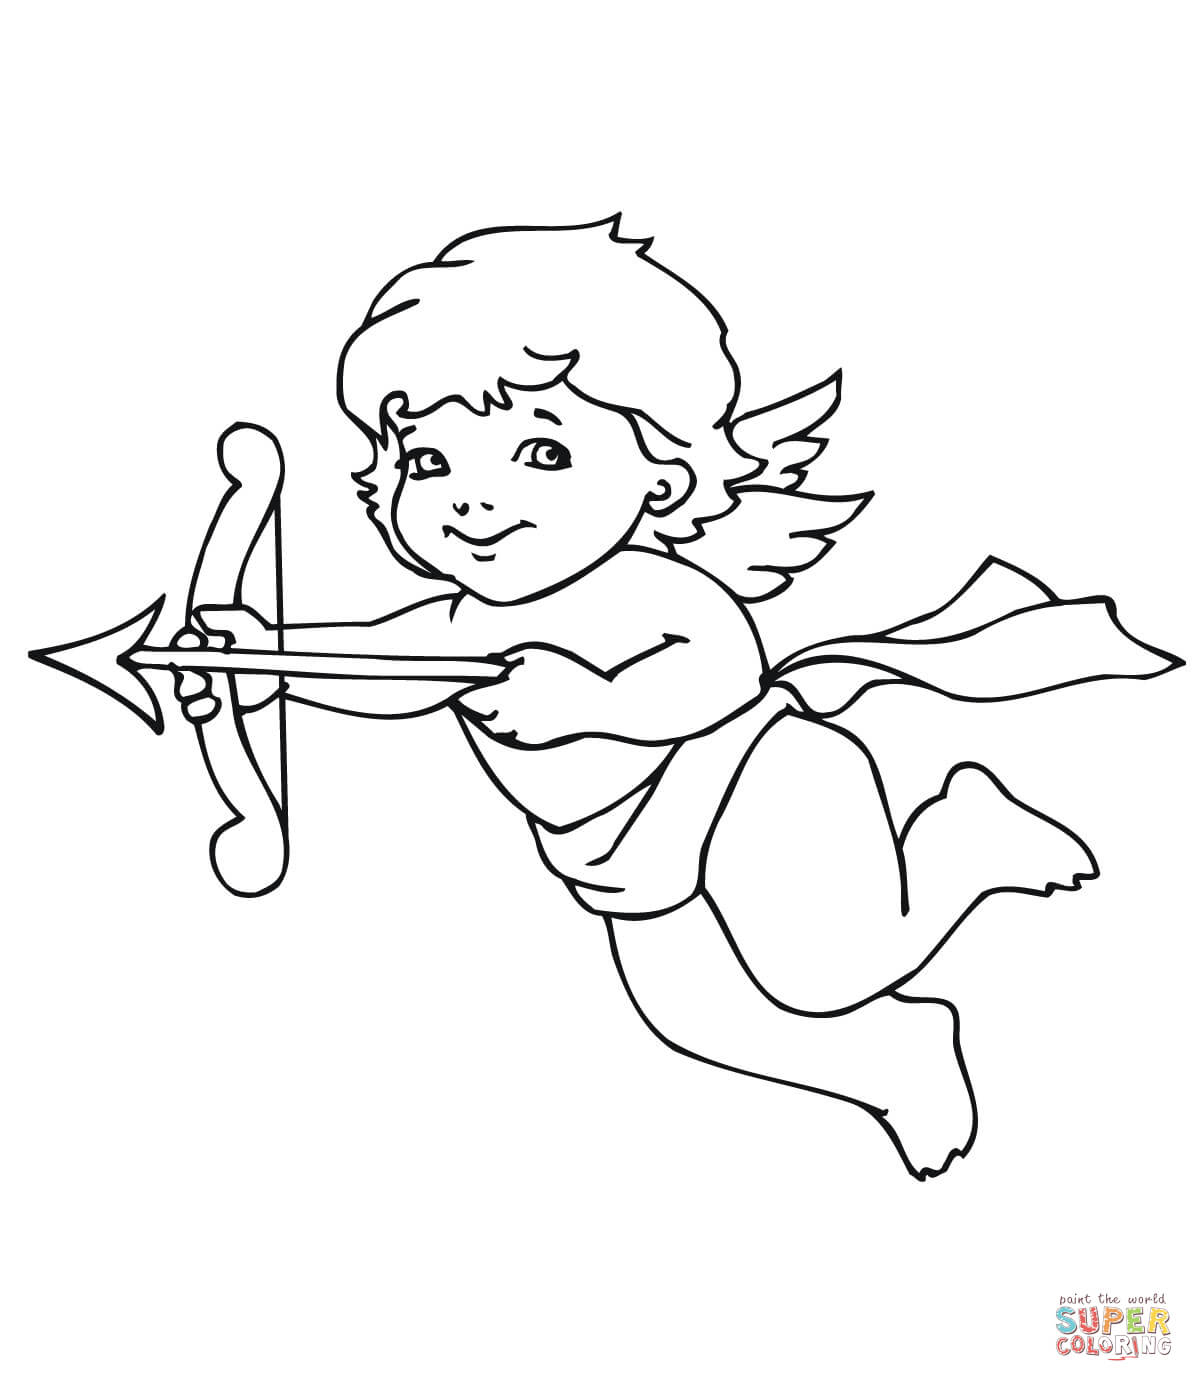 Cute Valentine Cupid Coloring Page | Free Printable Coloring Pages - Free Printable Pictures Of Cupid